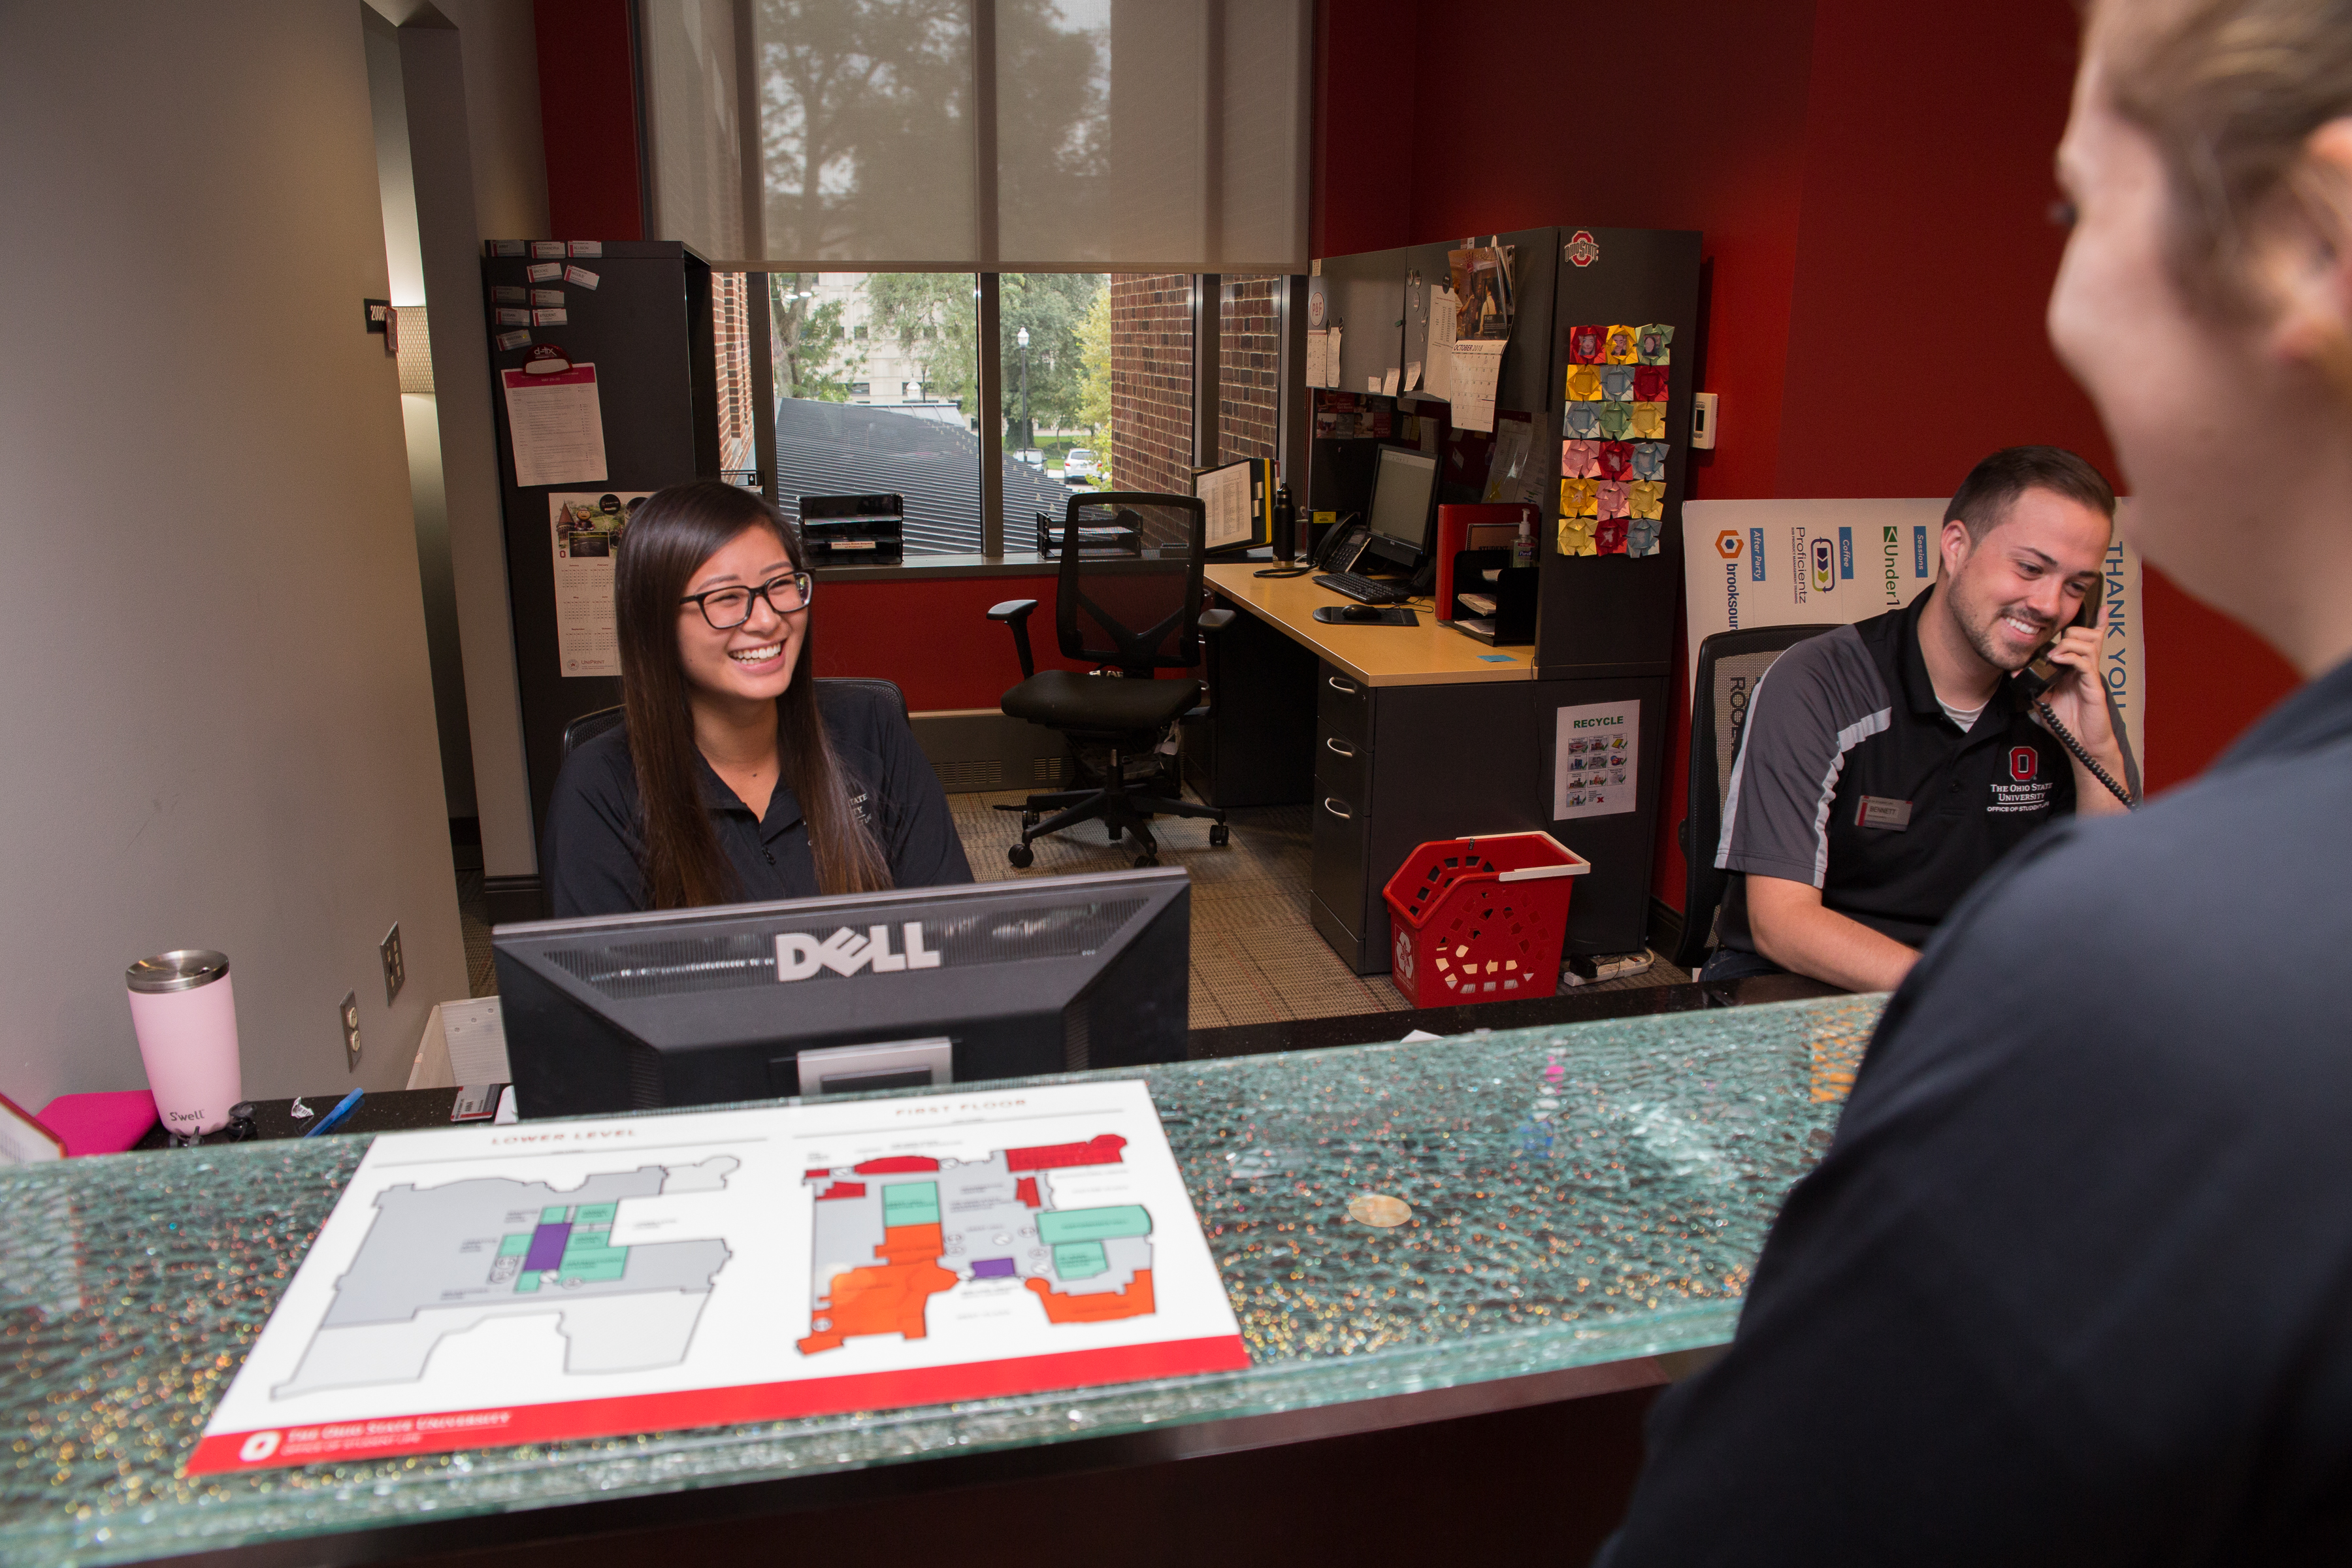 Students helping visitors at the administration desk in the Ohio Union.